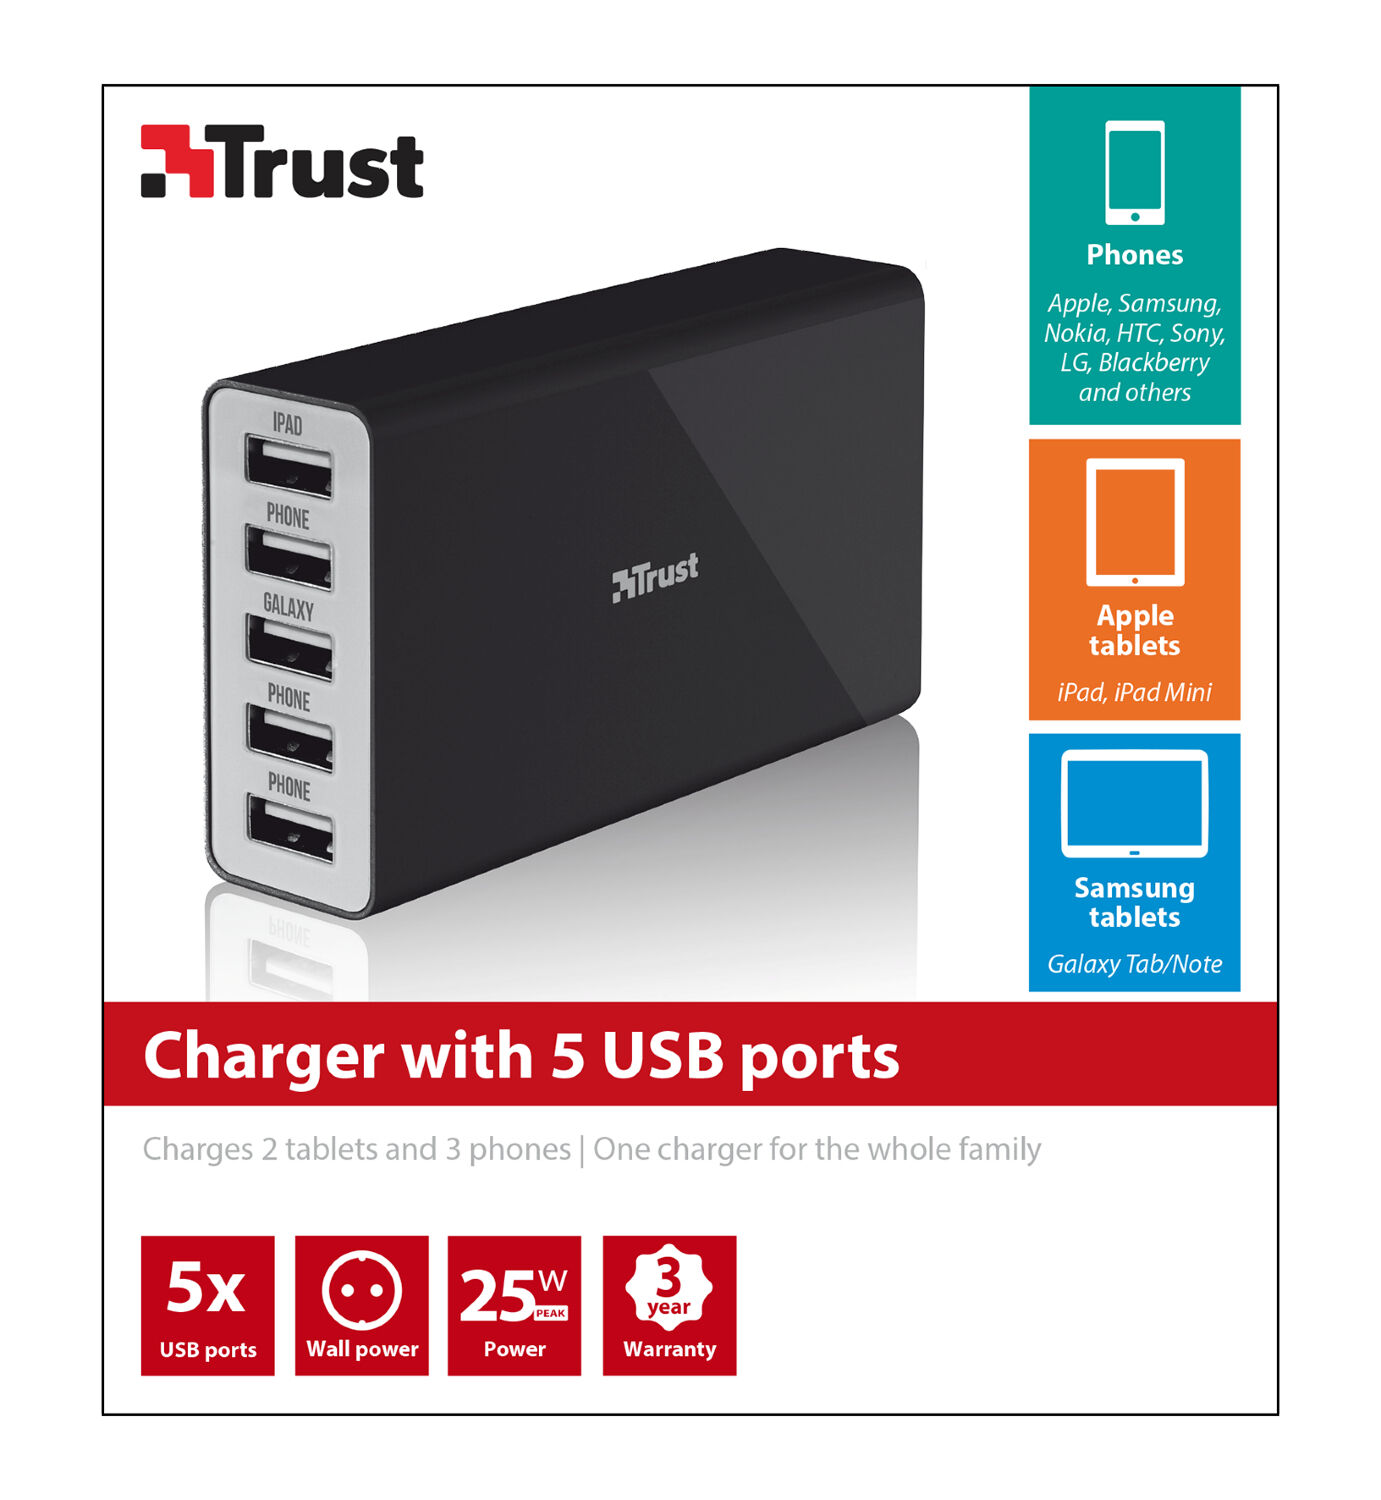 TRUST 25W MAINS CHARGER WITH 5 USB PORTS FOR UP TO 2 TABLETS PLUS 3 PHONES